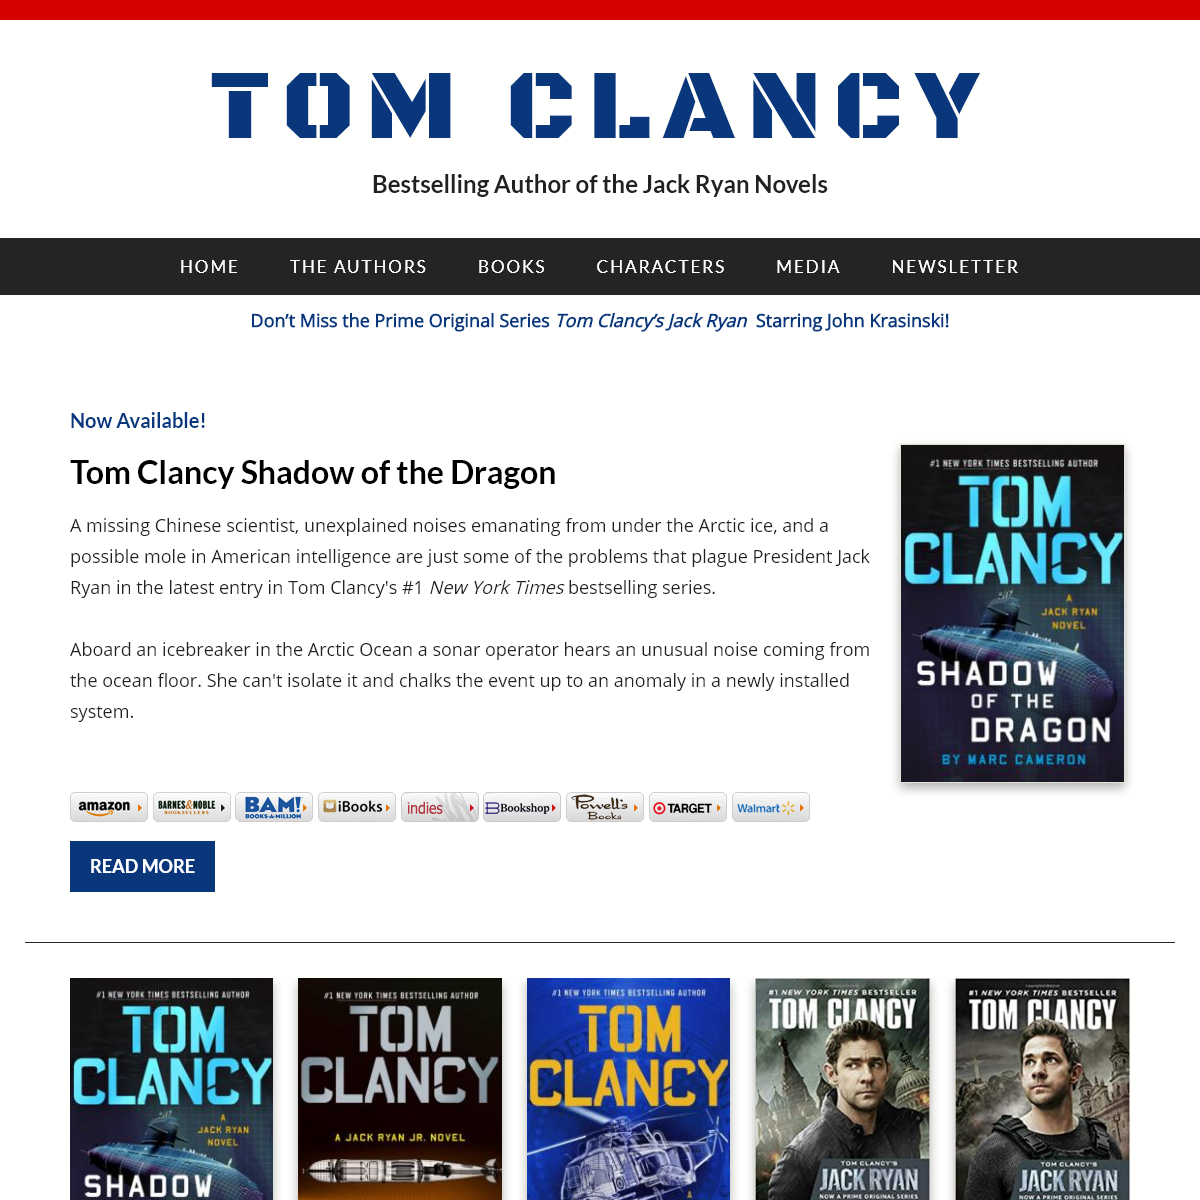 A complete backup of tomclancy.com